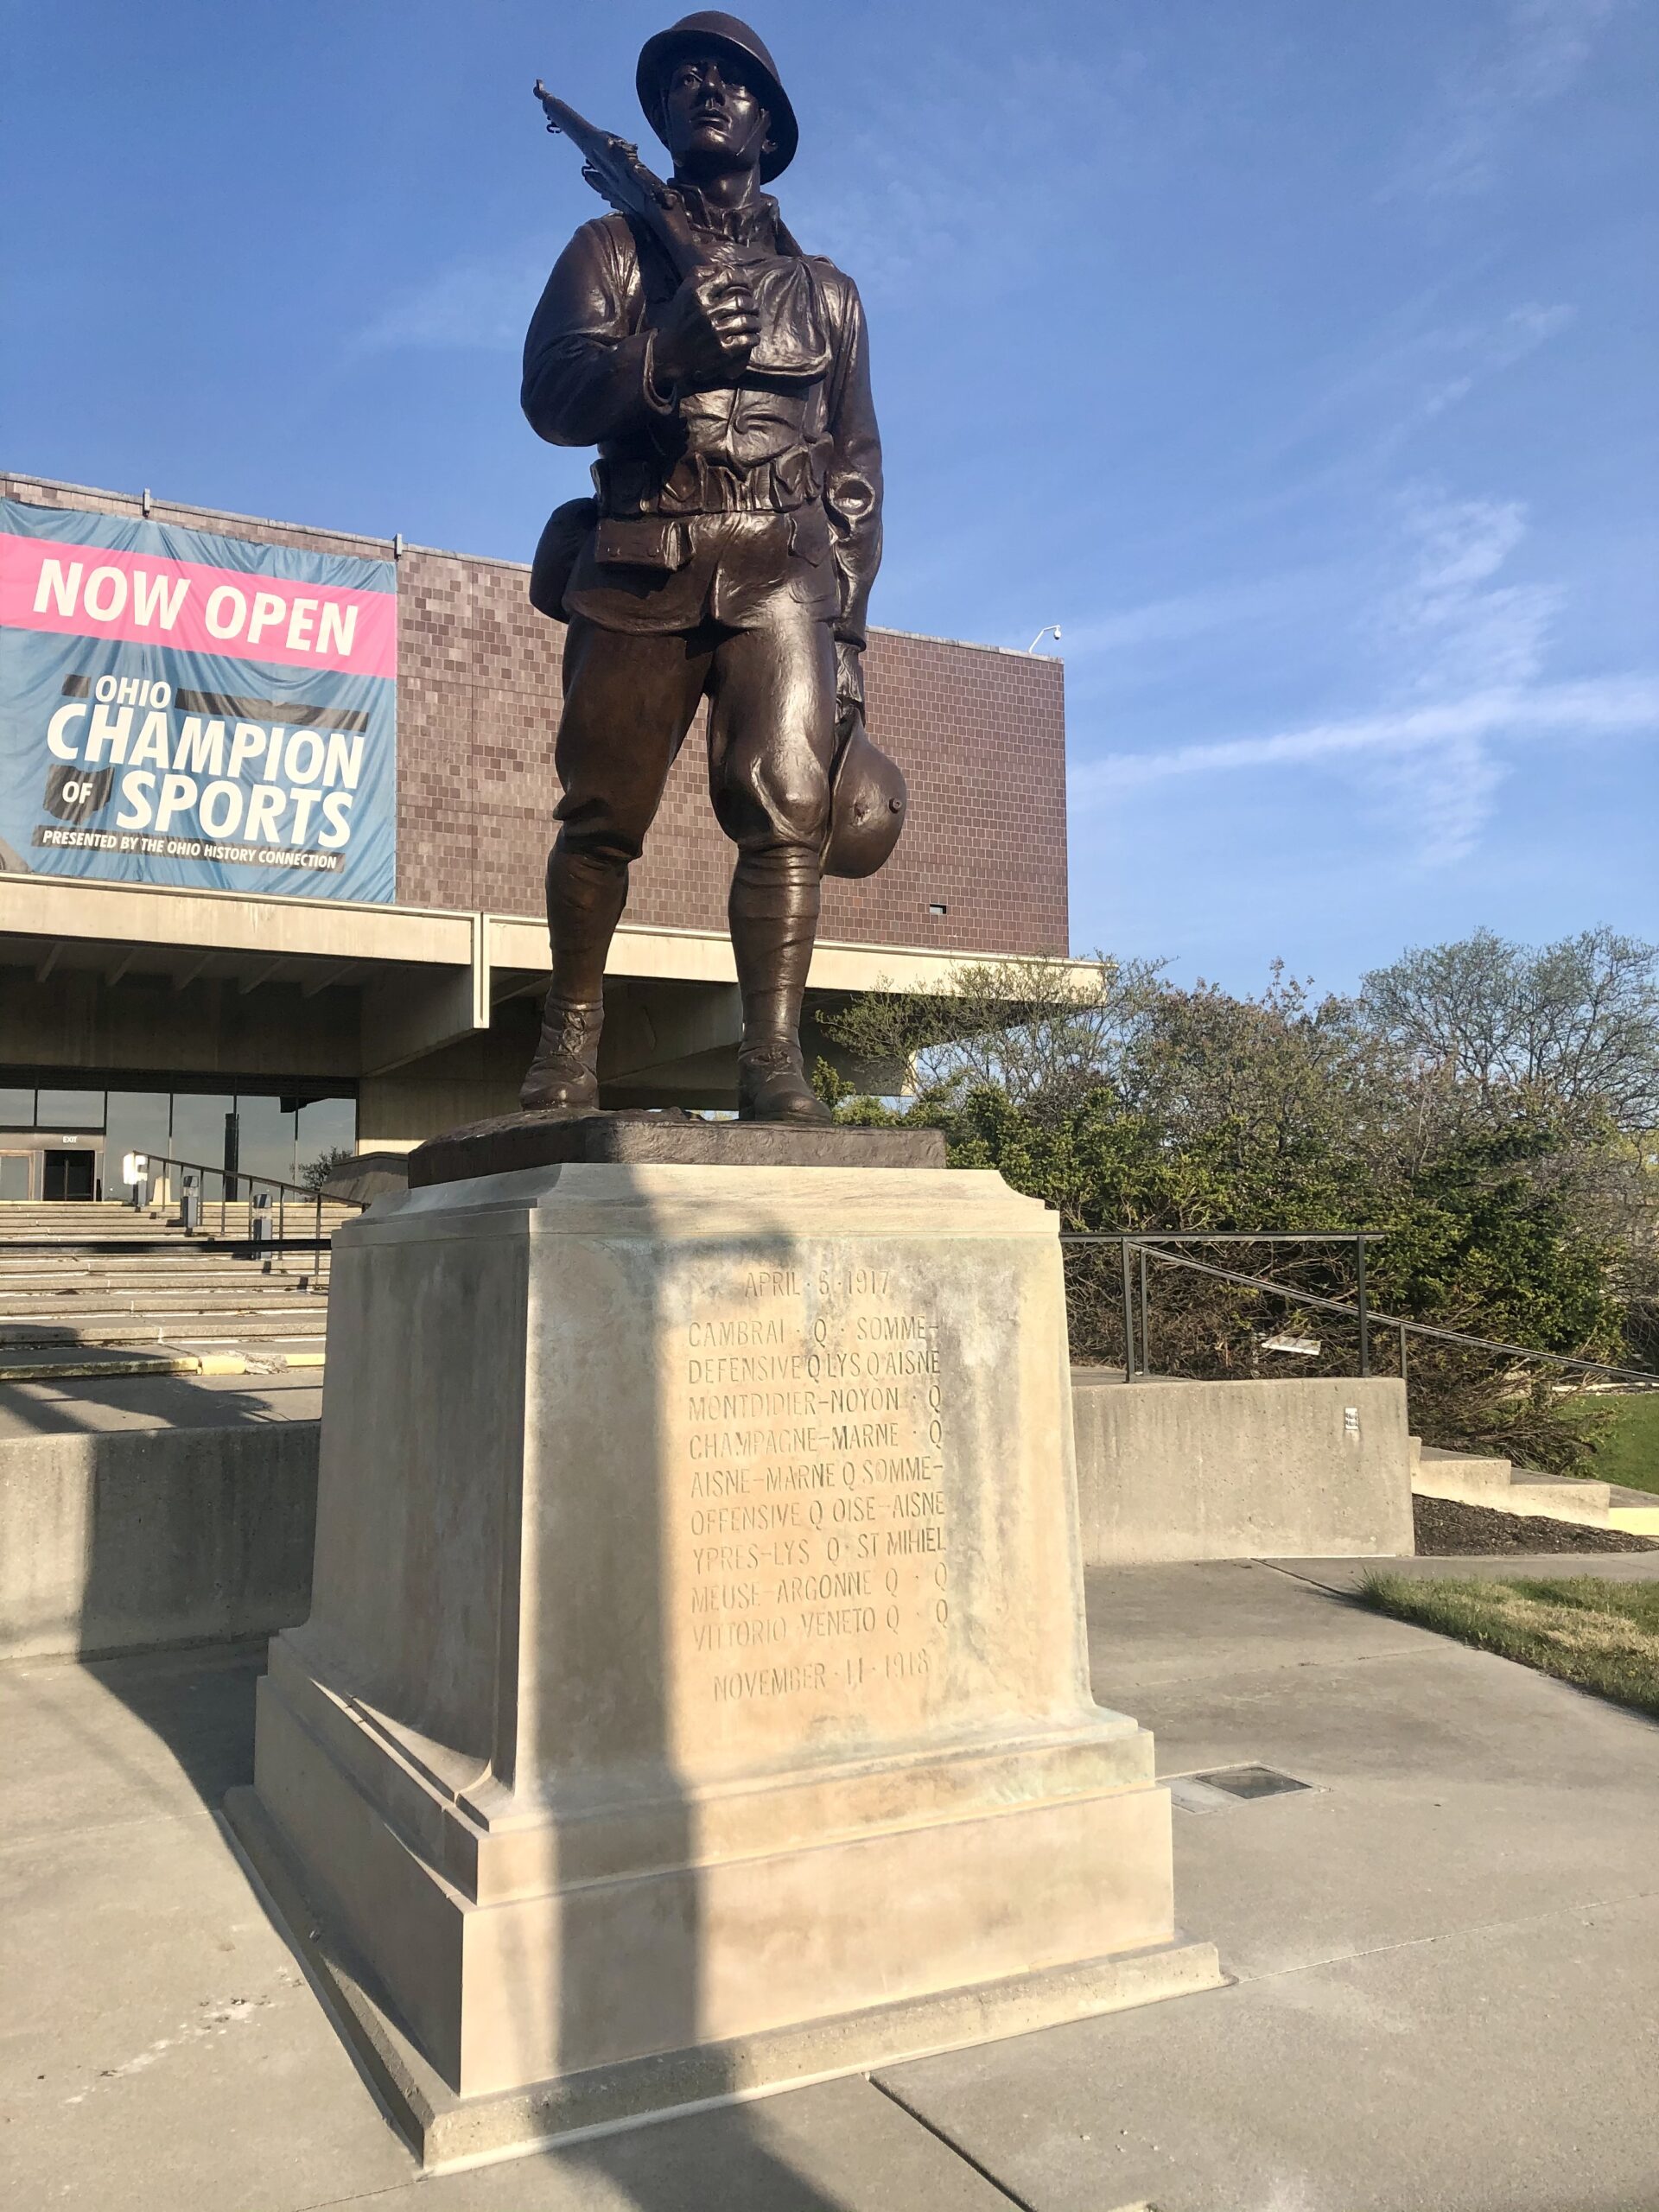 Sculpted by Bruce Wilder Saville, Victorious Soldier portrays a WWI infantryman, often referred to as a “Doughboy,” proudly returning from battle